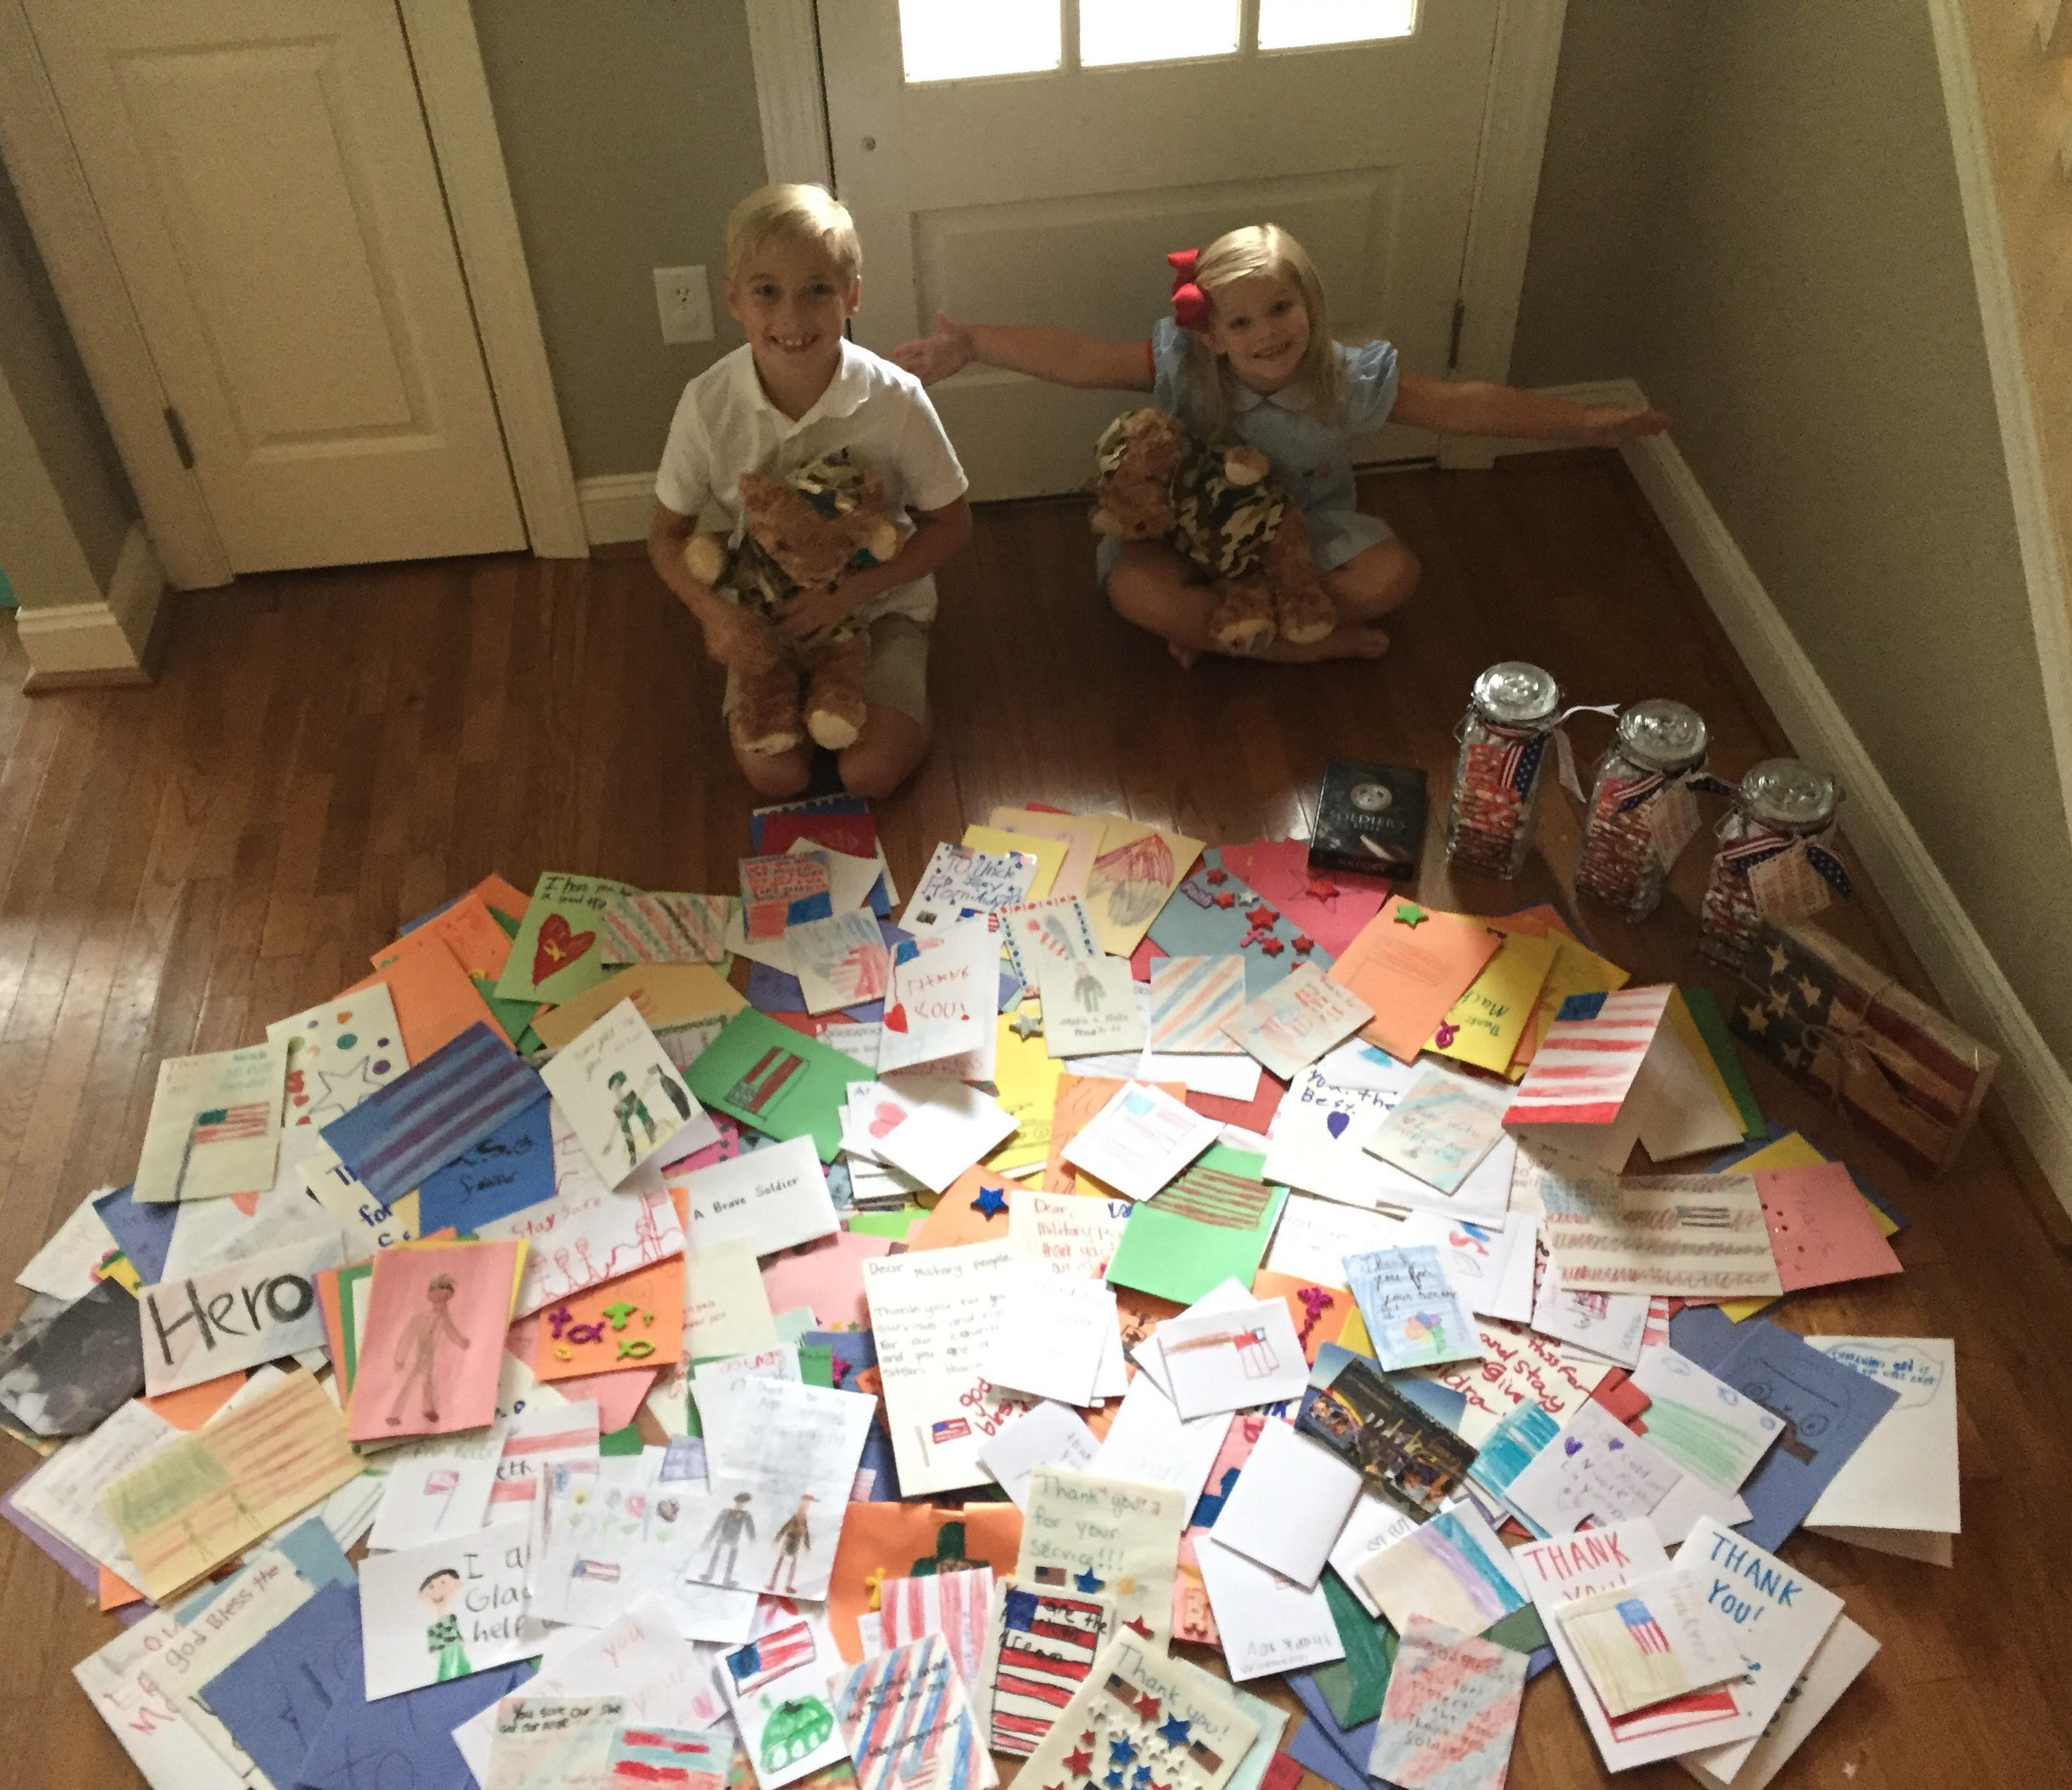 Family serves country by gathering greeting cards for soldiers abroad